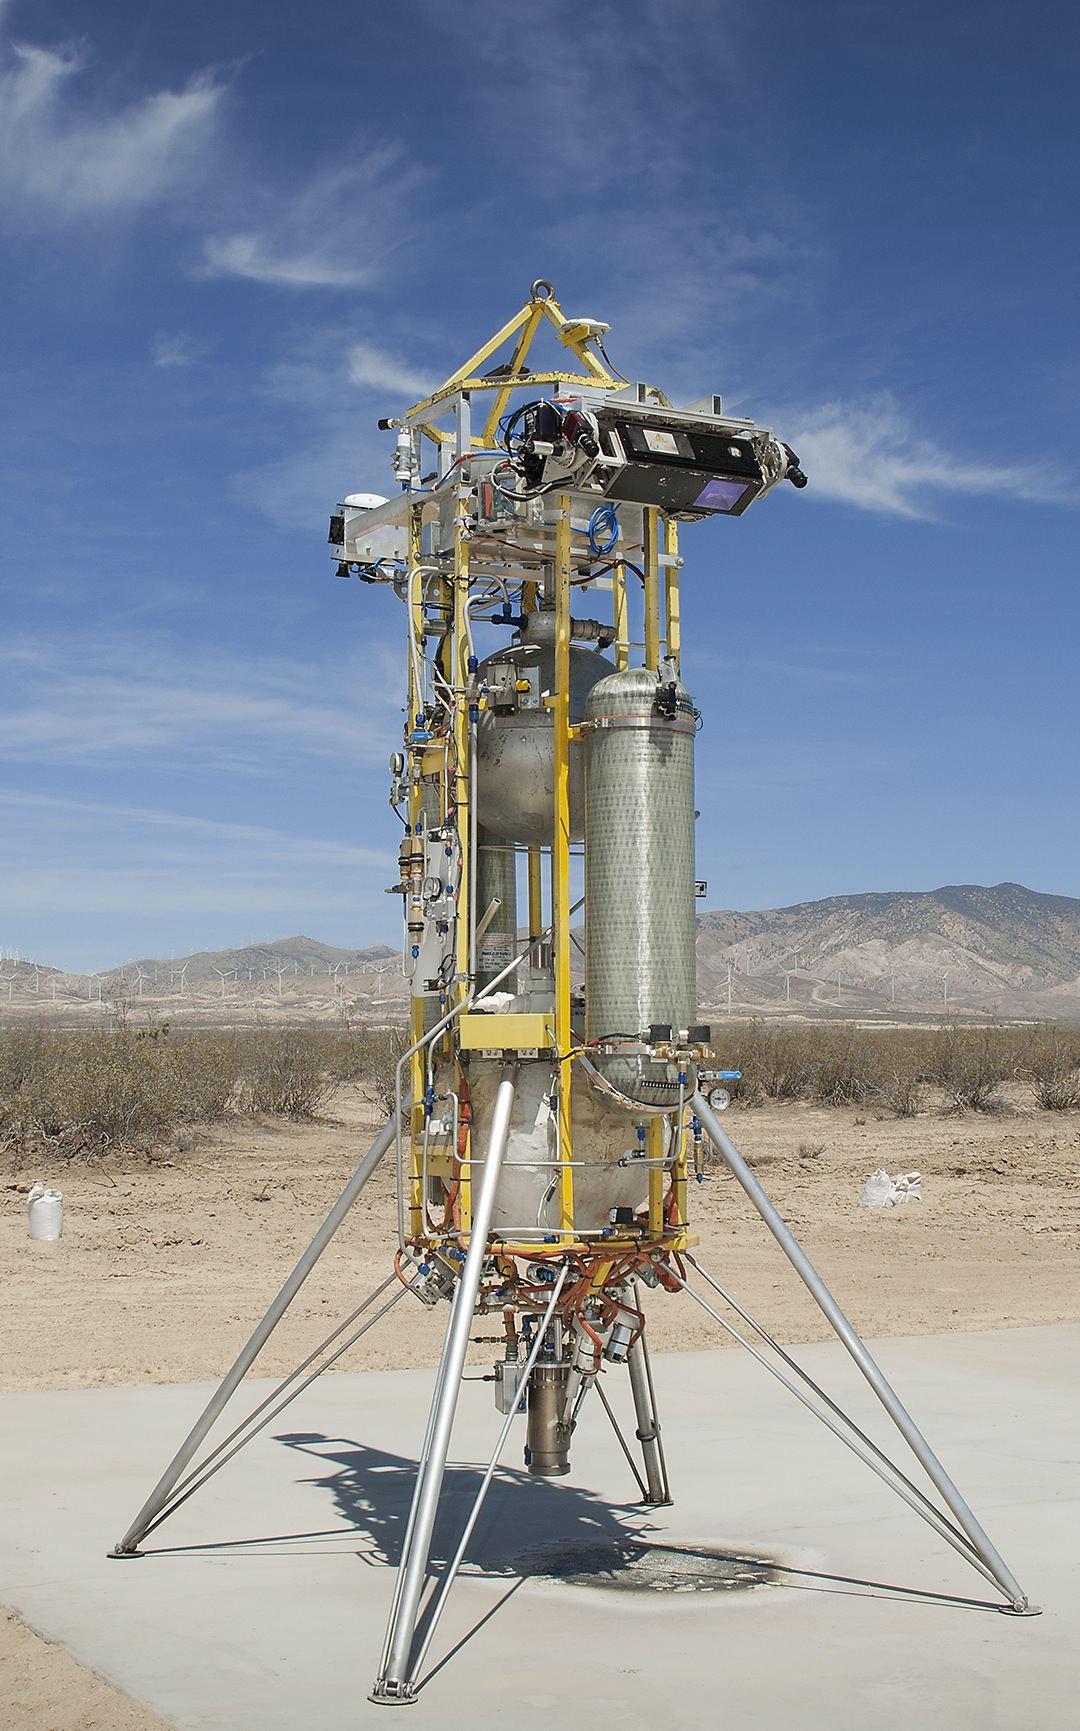 Astrobotic Technology's autonomous landing system is mounted atop Masten Space Systems' Xombie vehicle prior to launch in the desert